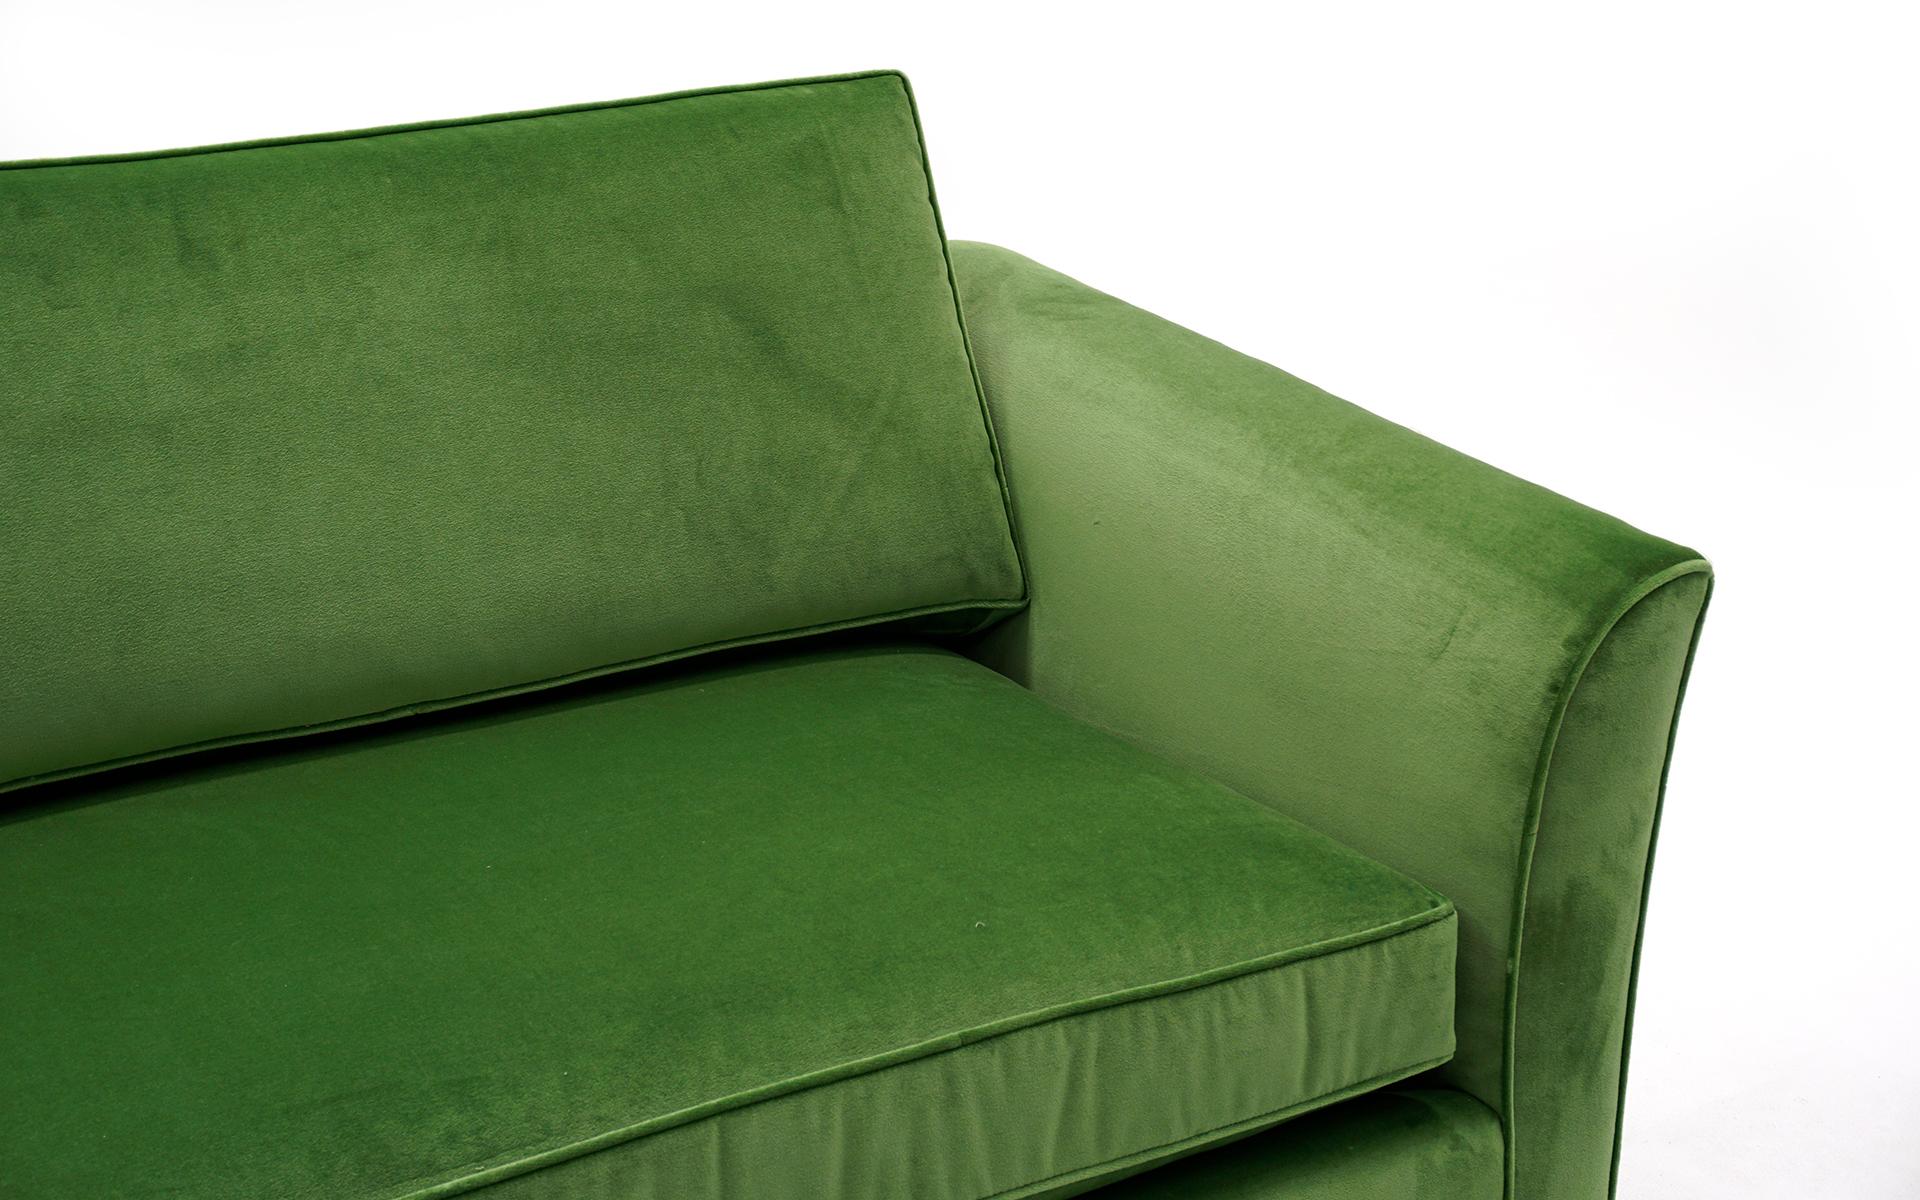 American Mid Century Sofa Restored and Reupholstered in High Quality Green Velvet